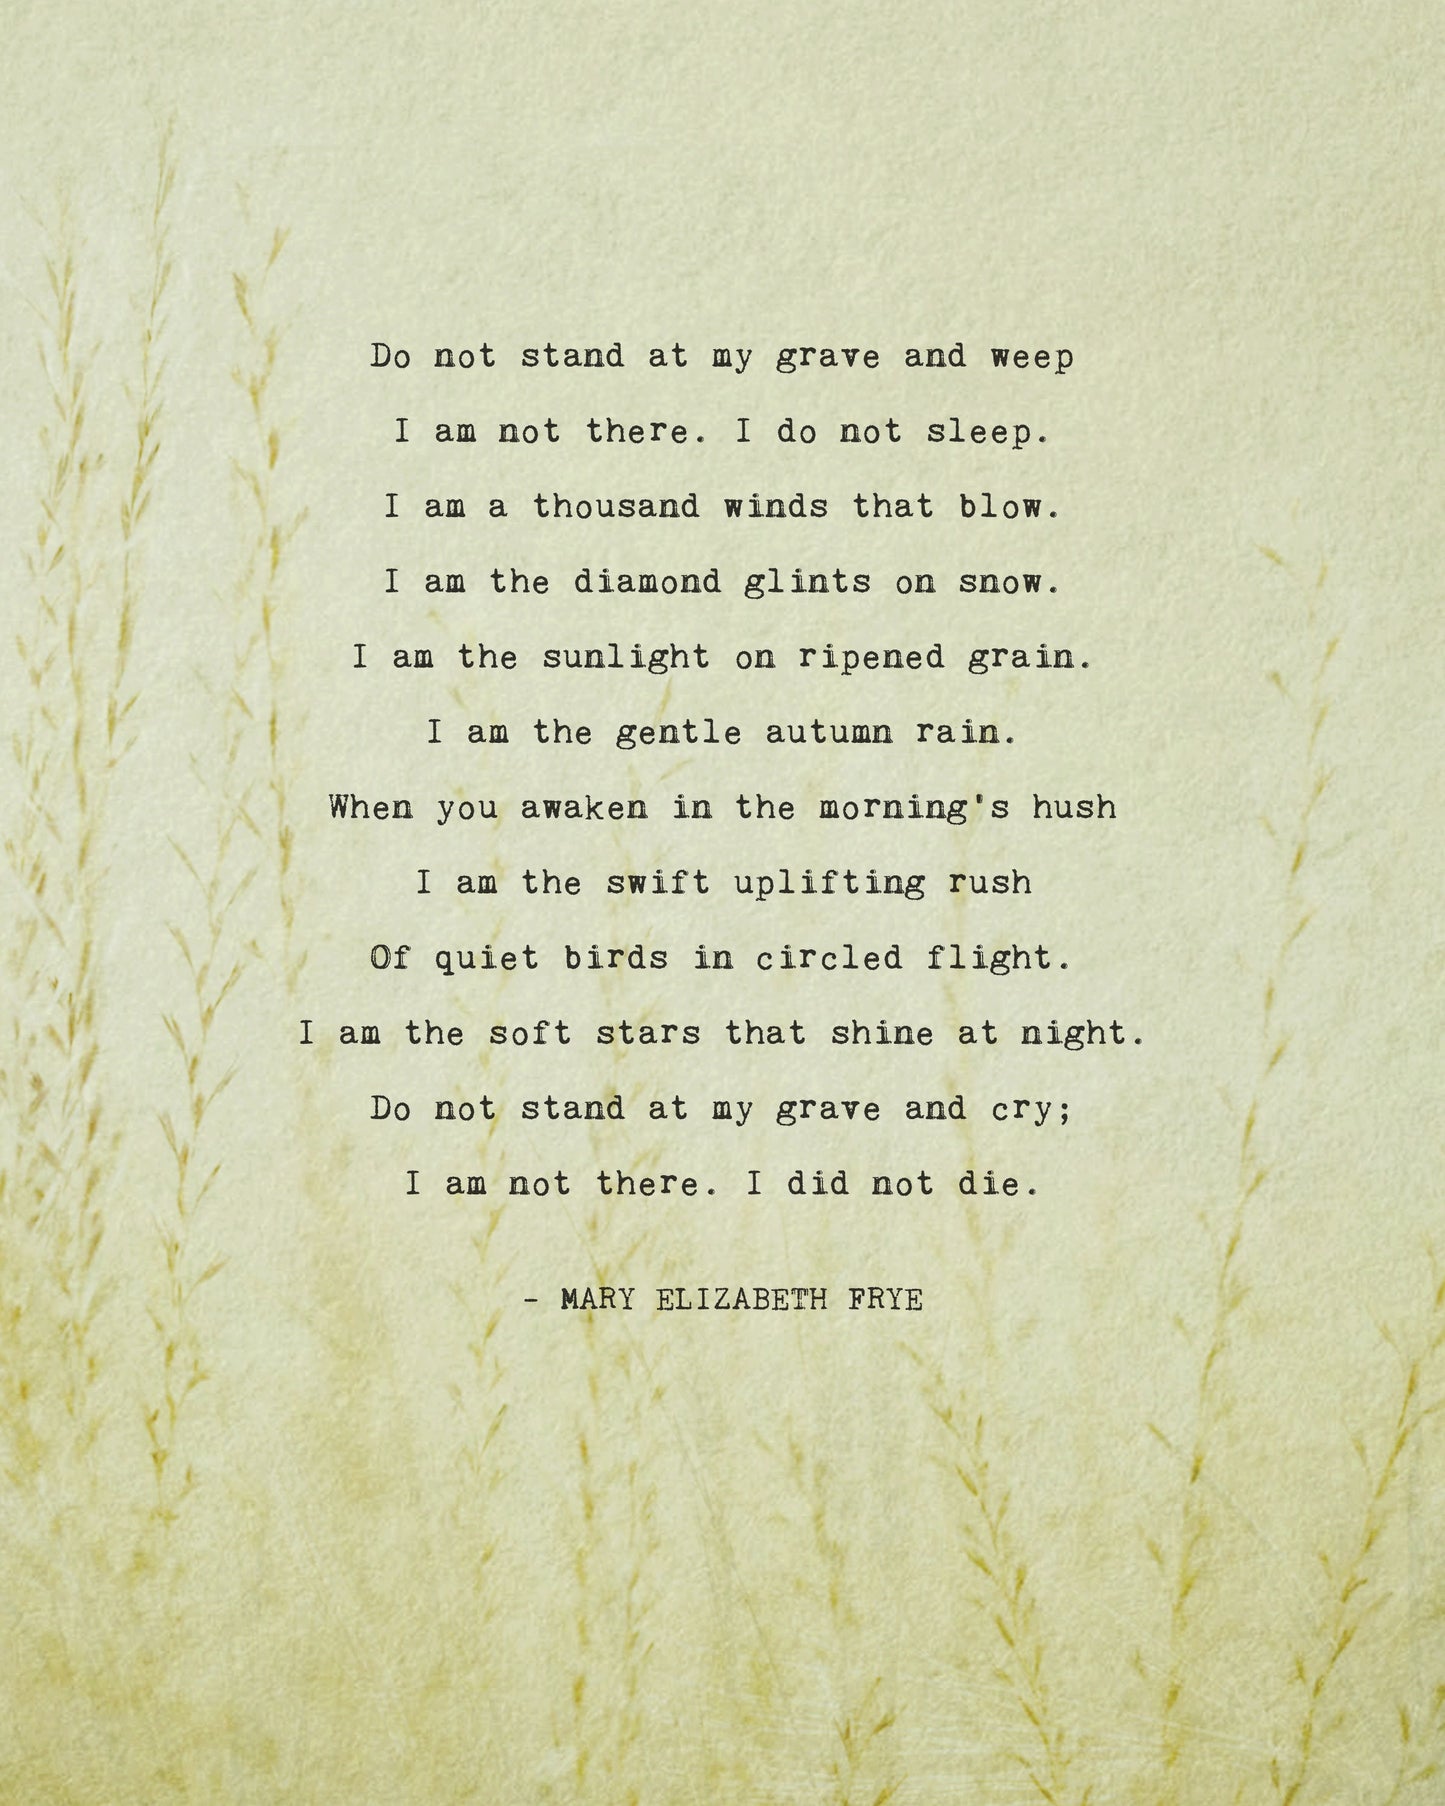 Do not stand at my grave and weep saying by Mary Frye